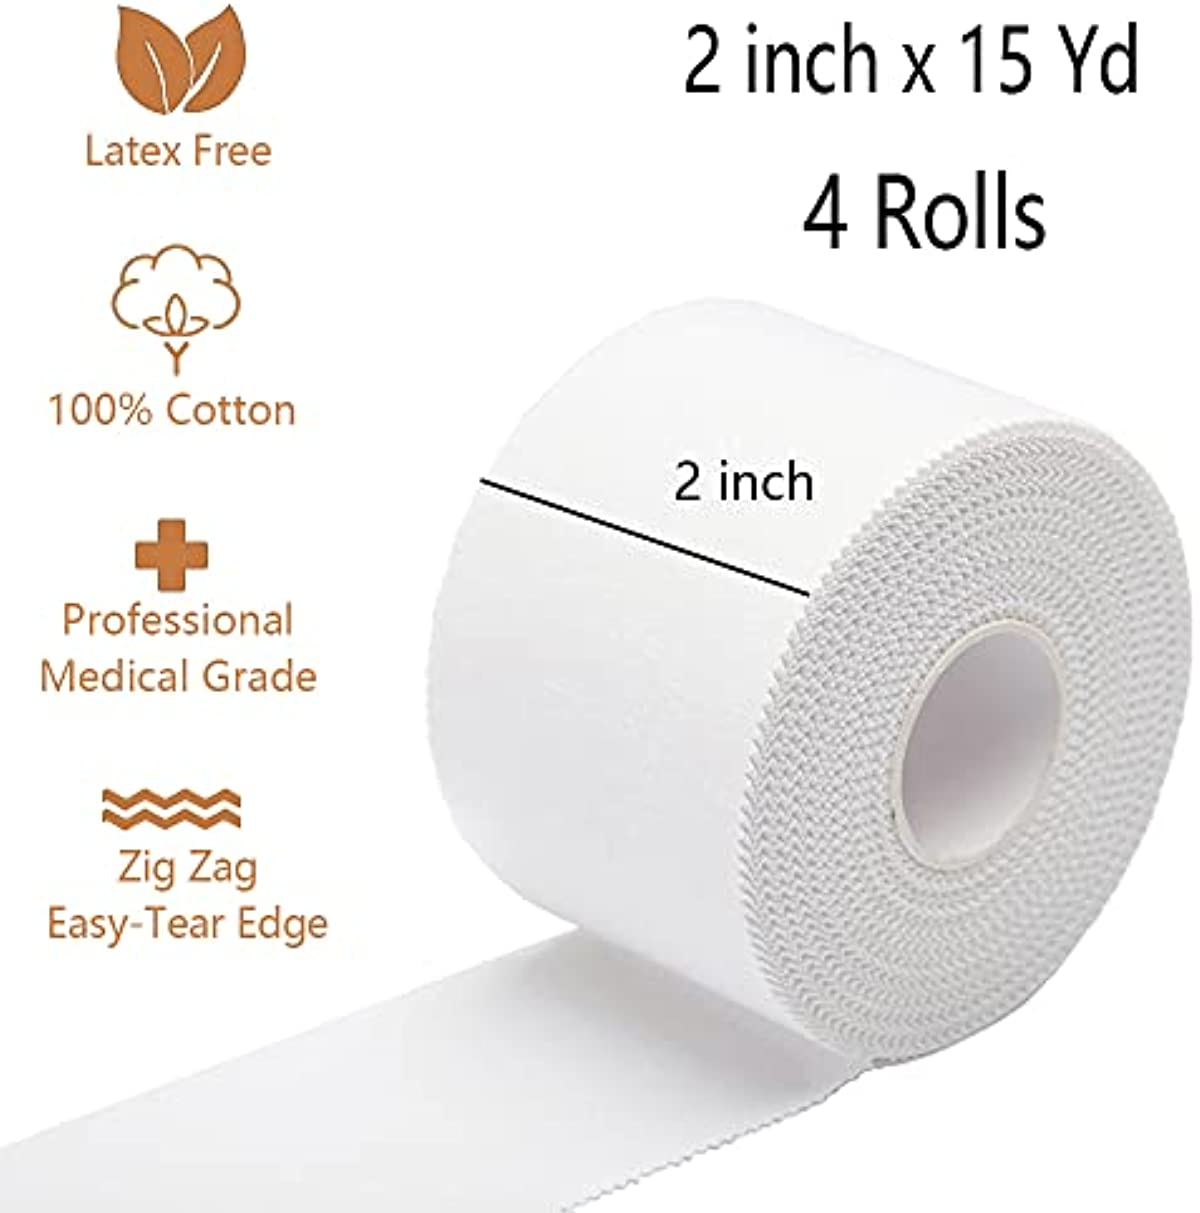 OBTANIM 4 Rolls White Athletic Sports Tapes No Sticky Residue - Latex Free Breathable Sports Tape for Athlete & Medical Trainers Gym Fitness Running Tennis Football, 2 Inch x 15Yard